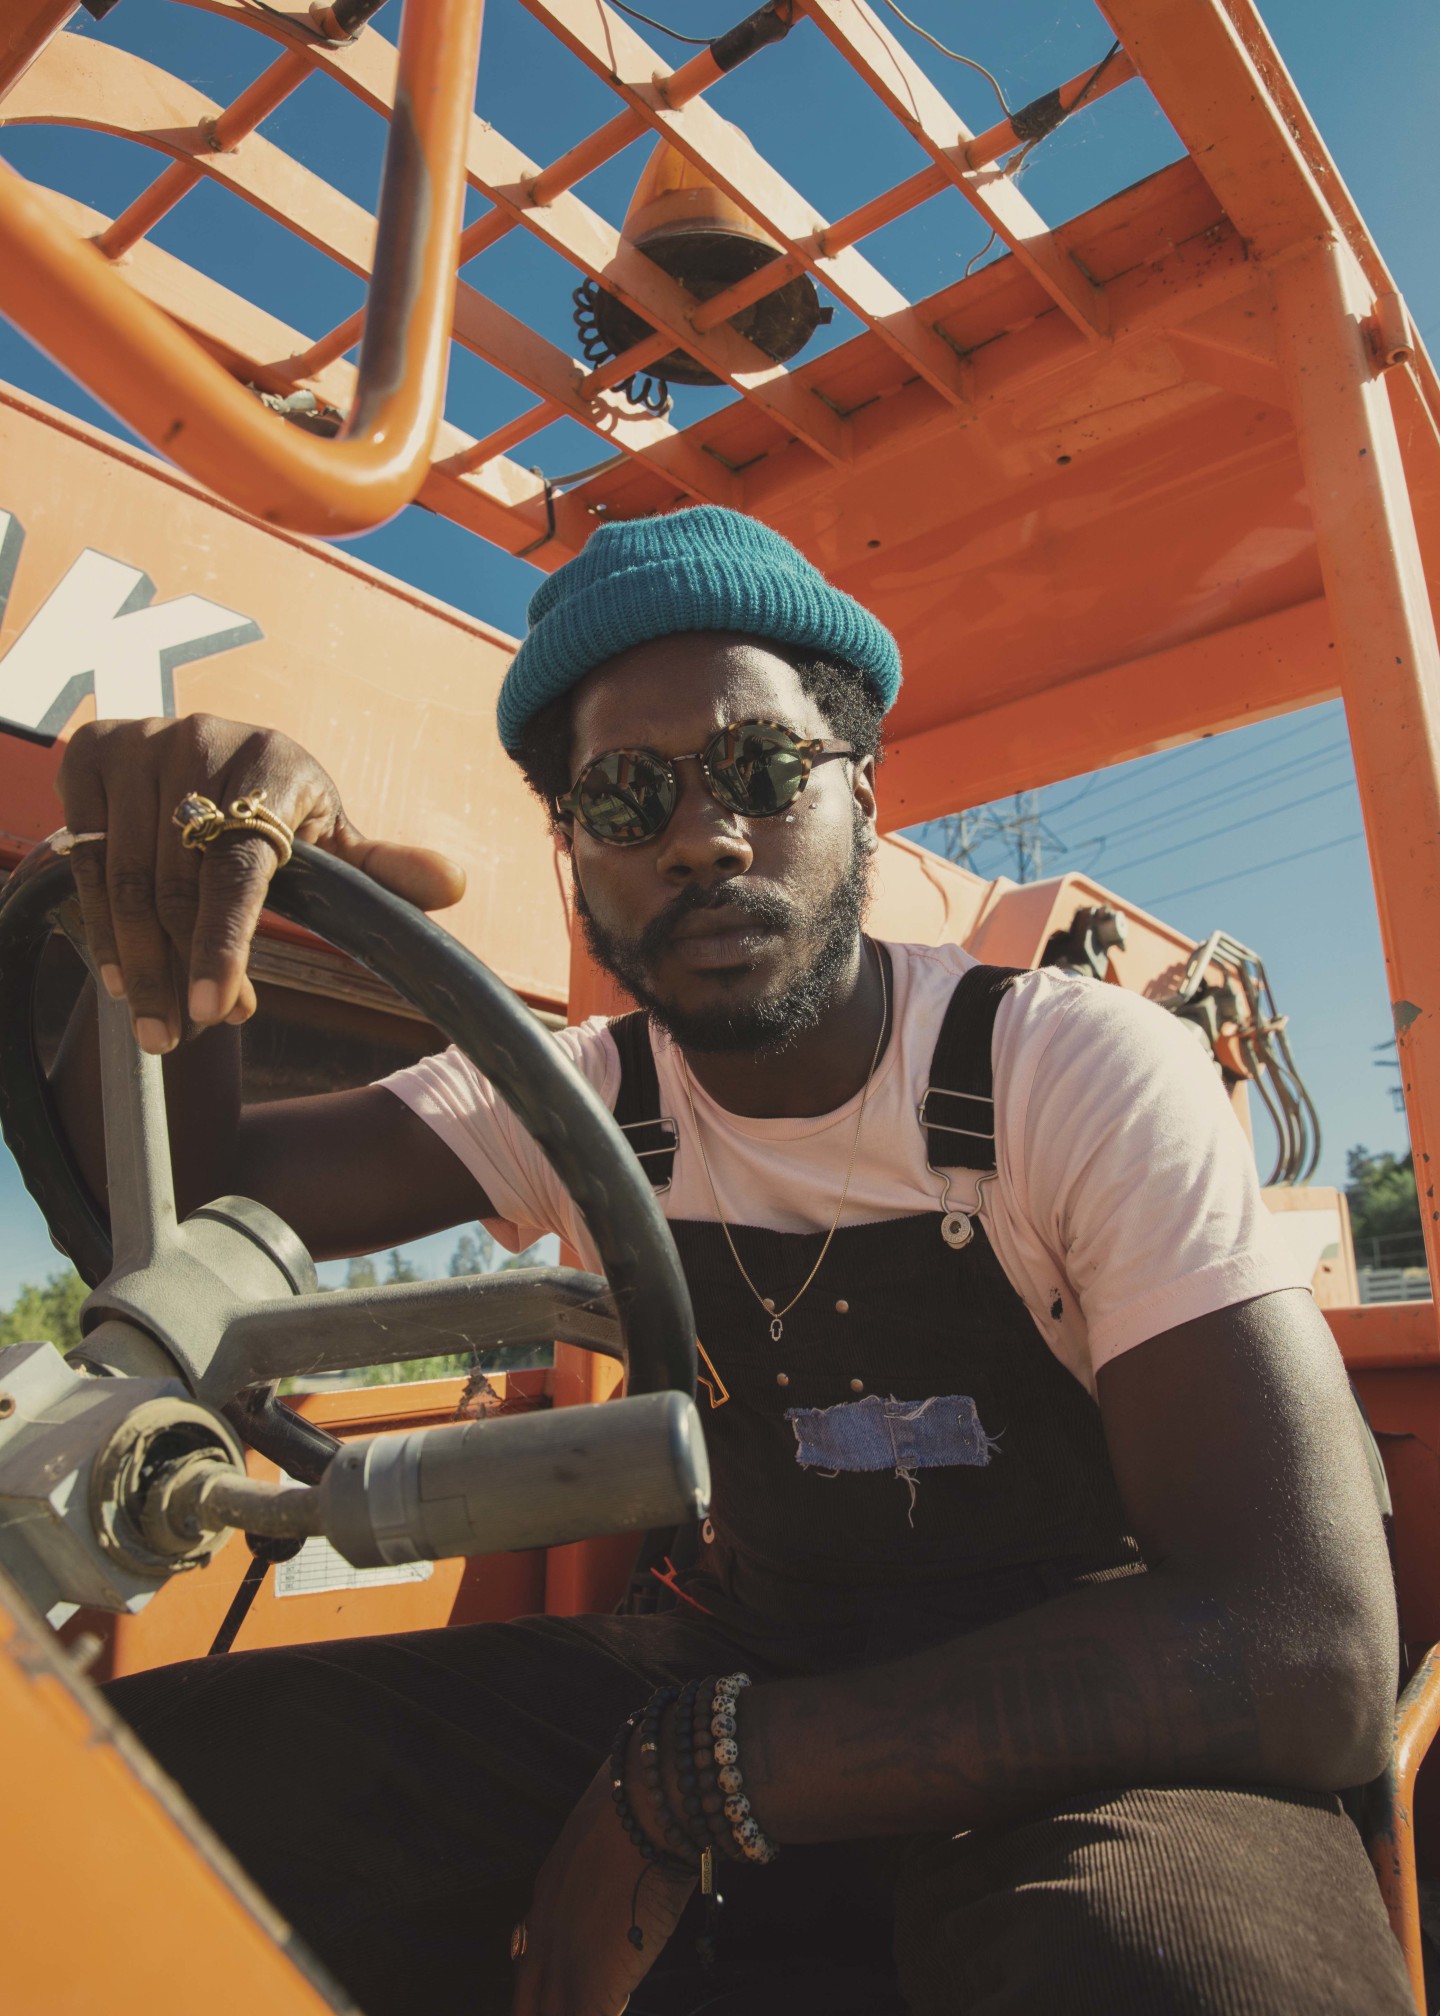 Channel Tres’s journey from South Central to stardom